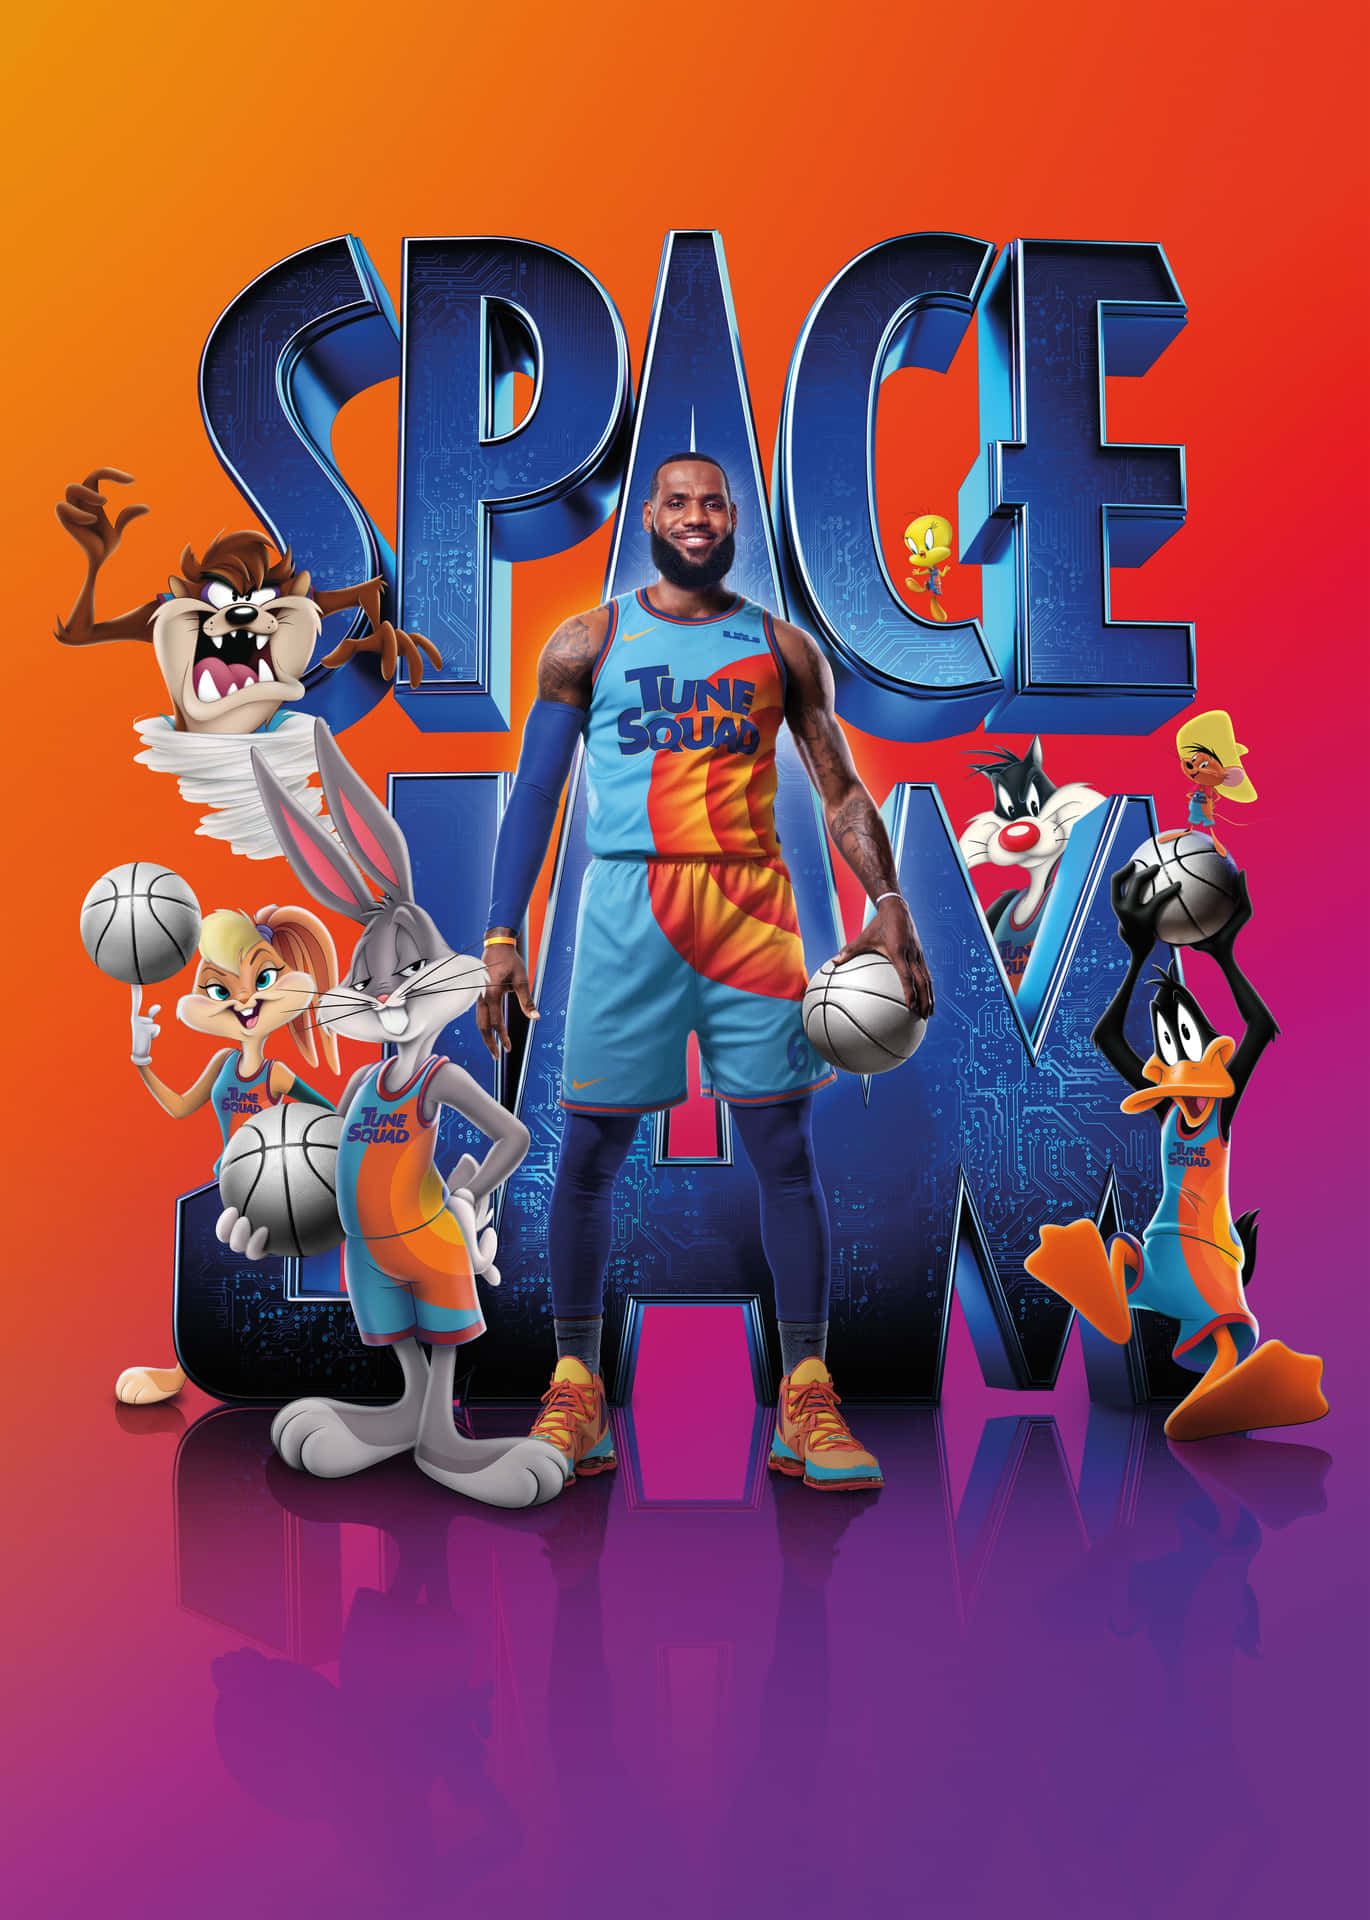 Witness Lebron James team up with Bugs Bunny and the rest of the Looney Tunes to save the universe Wallpaper